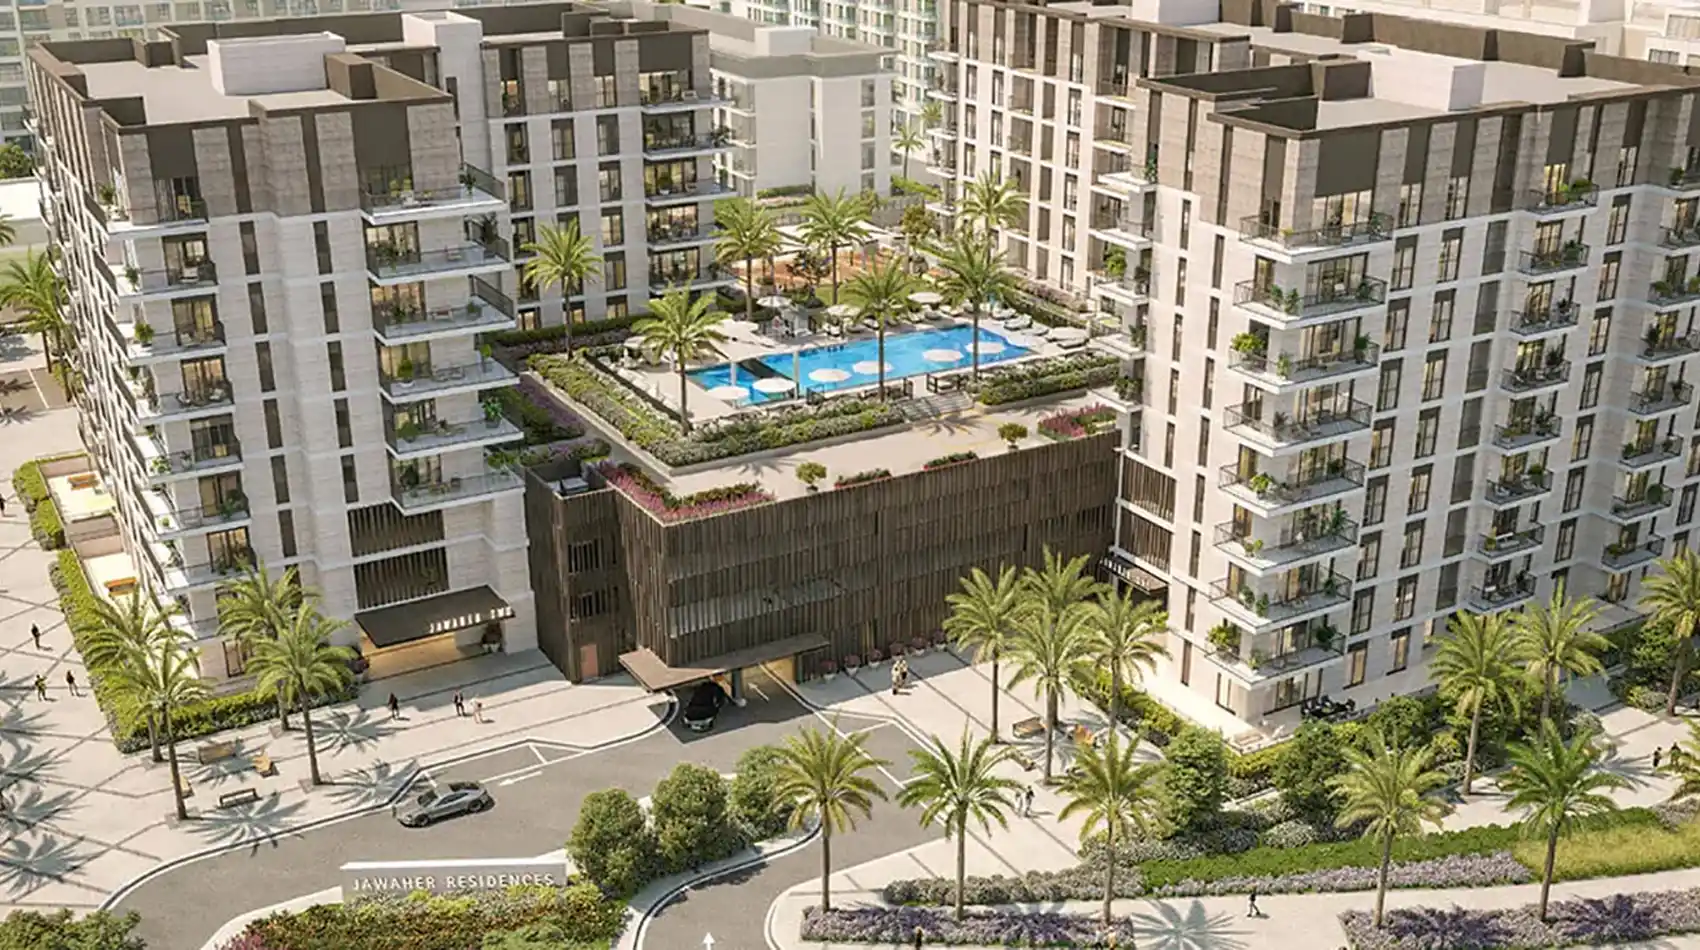 Jawaher Residences by Eagle Hills